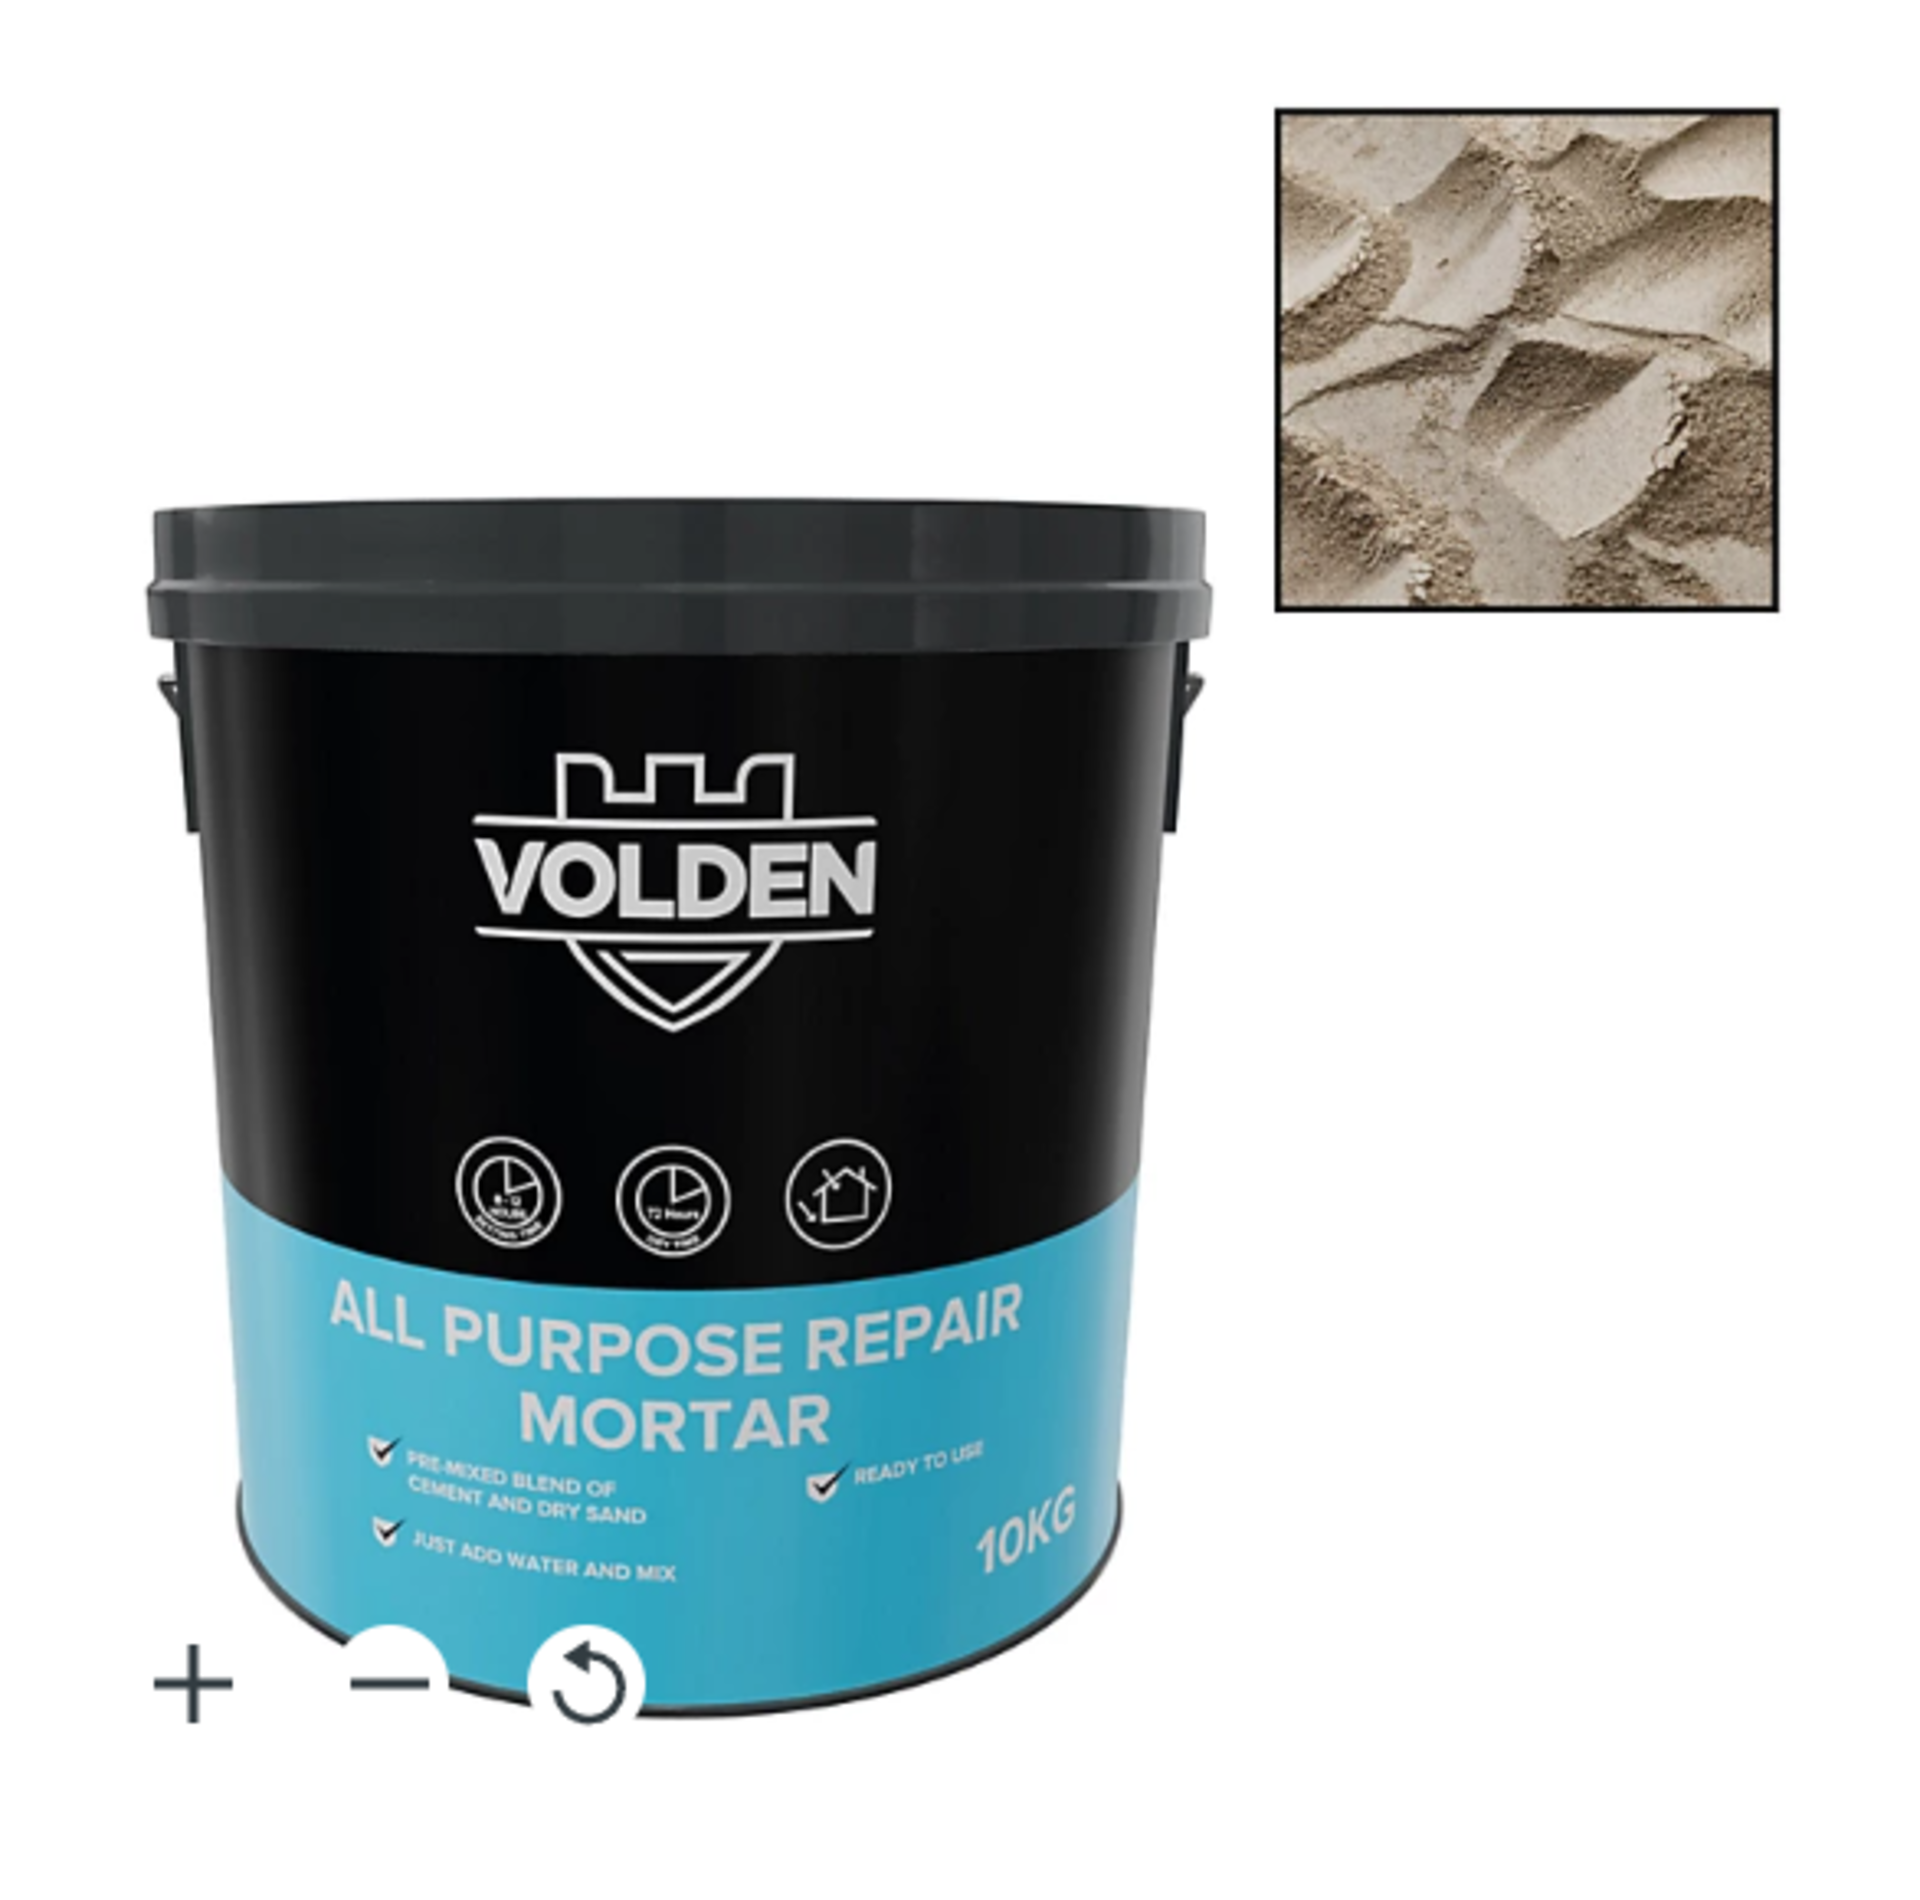 Pallet To Contain 45 x Volden Ready-mixed Repair mortar, 10kg Tubs. This product is pre-blended - Image 2 of 4